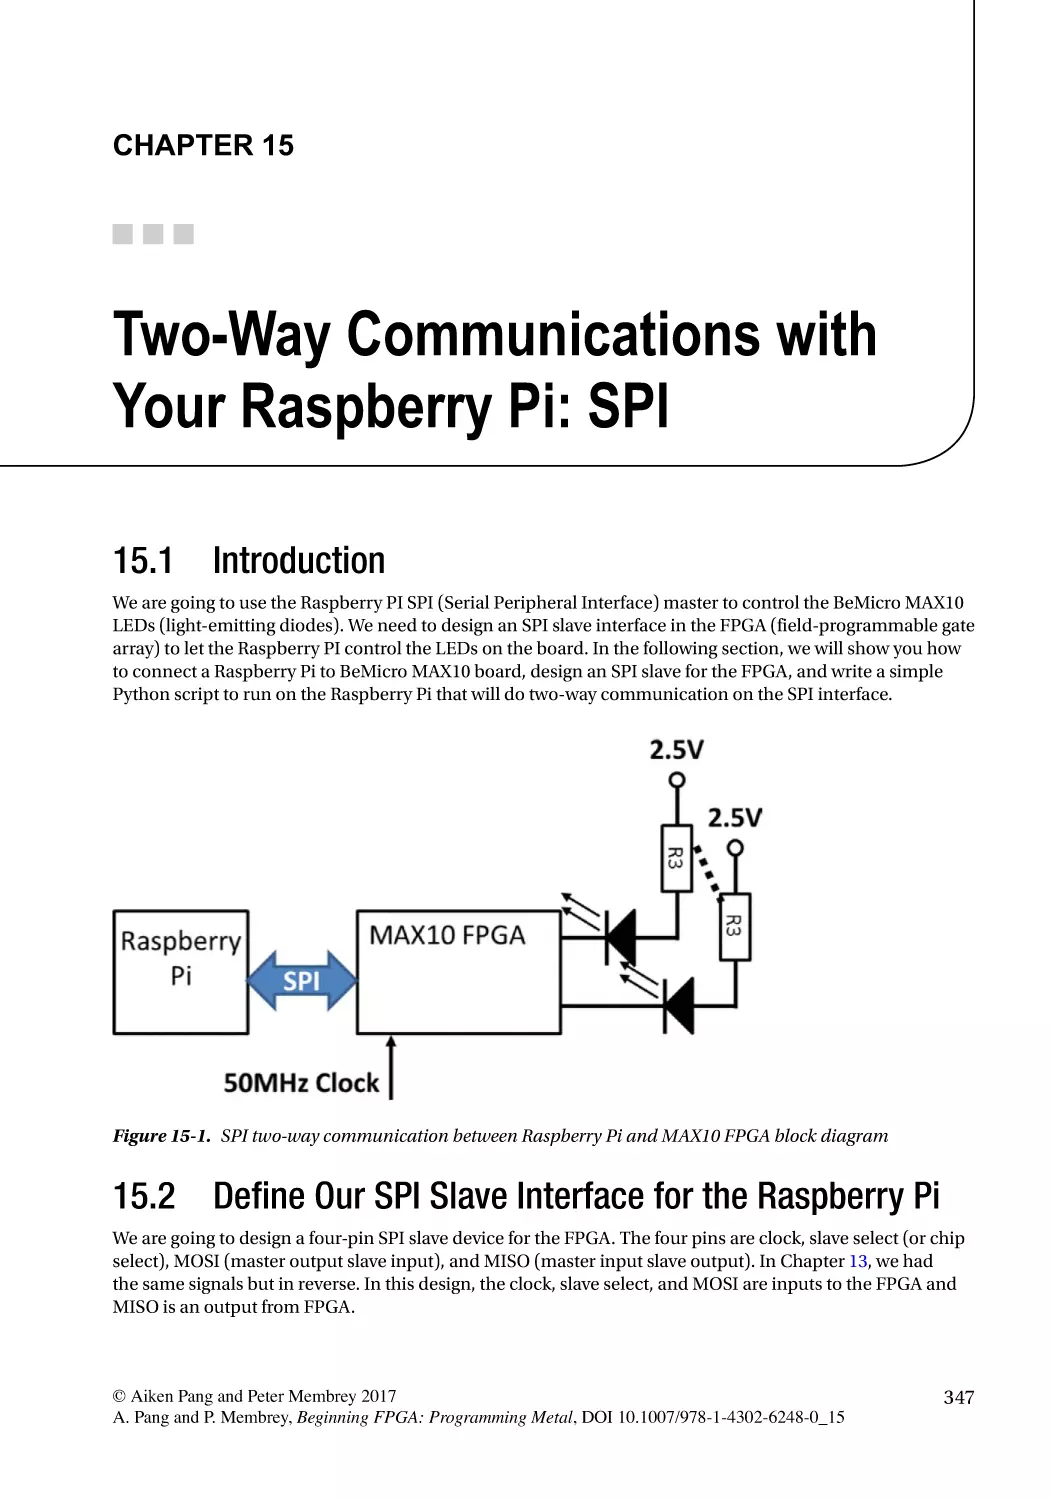 Chapter 15
15.1 Introduction
15.2 Define Our SPI Slave Interface for the Raspberry Pi